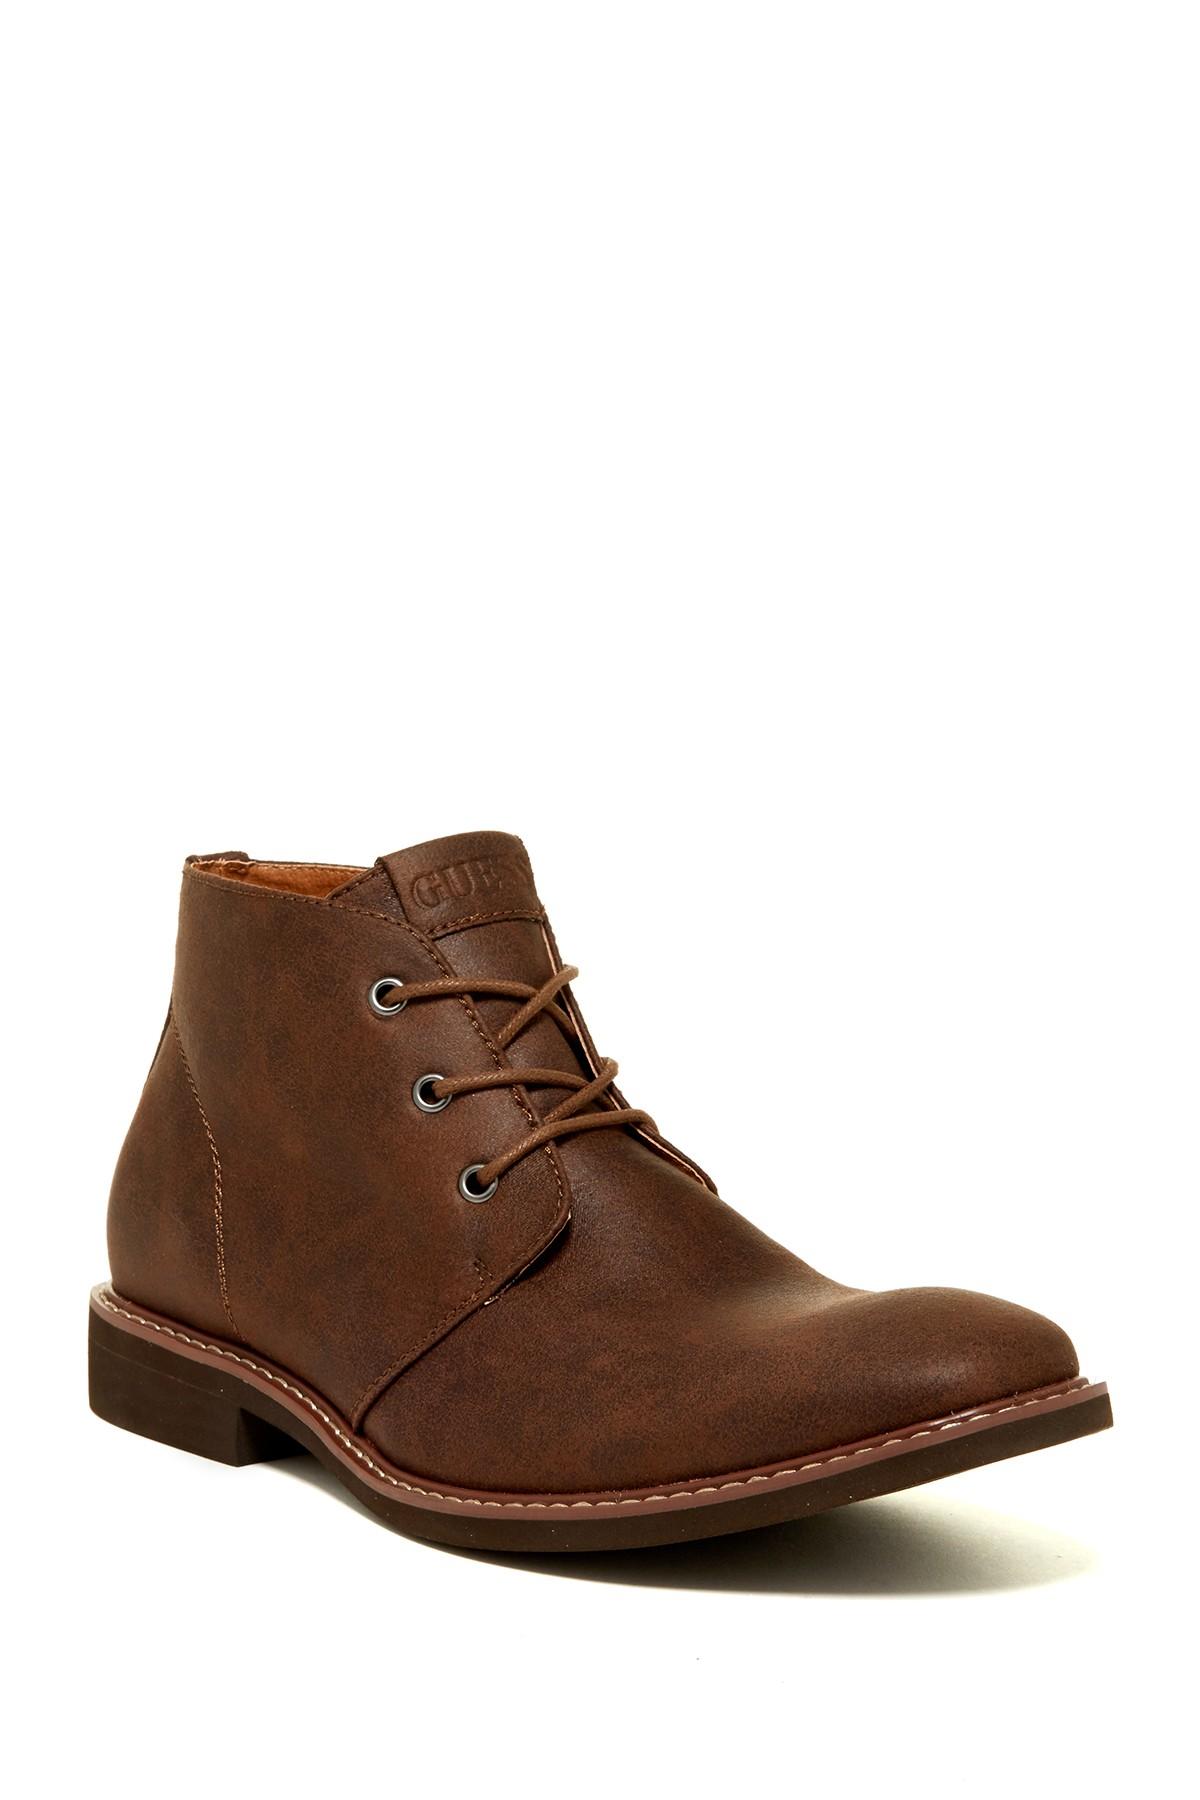 Guess Joey Chukka Boot in Brown for Men | Lyst